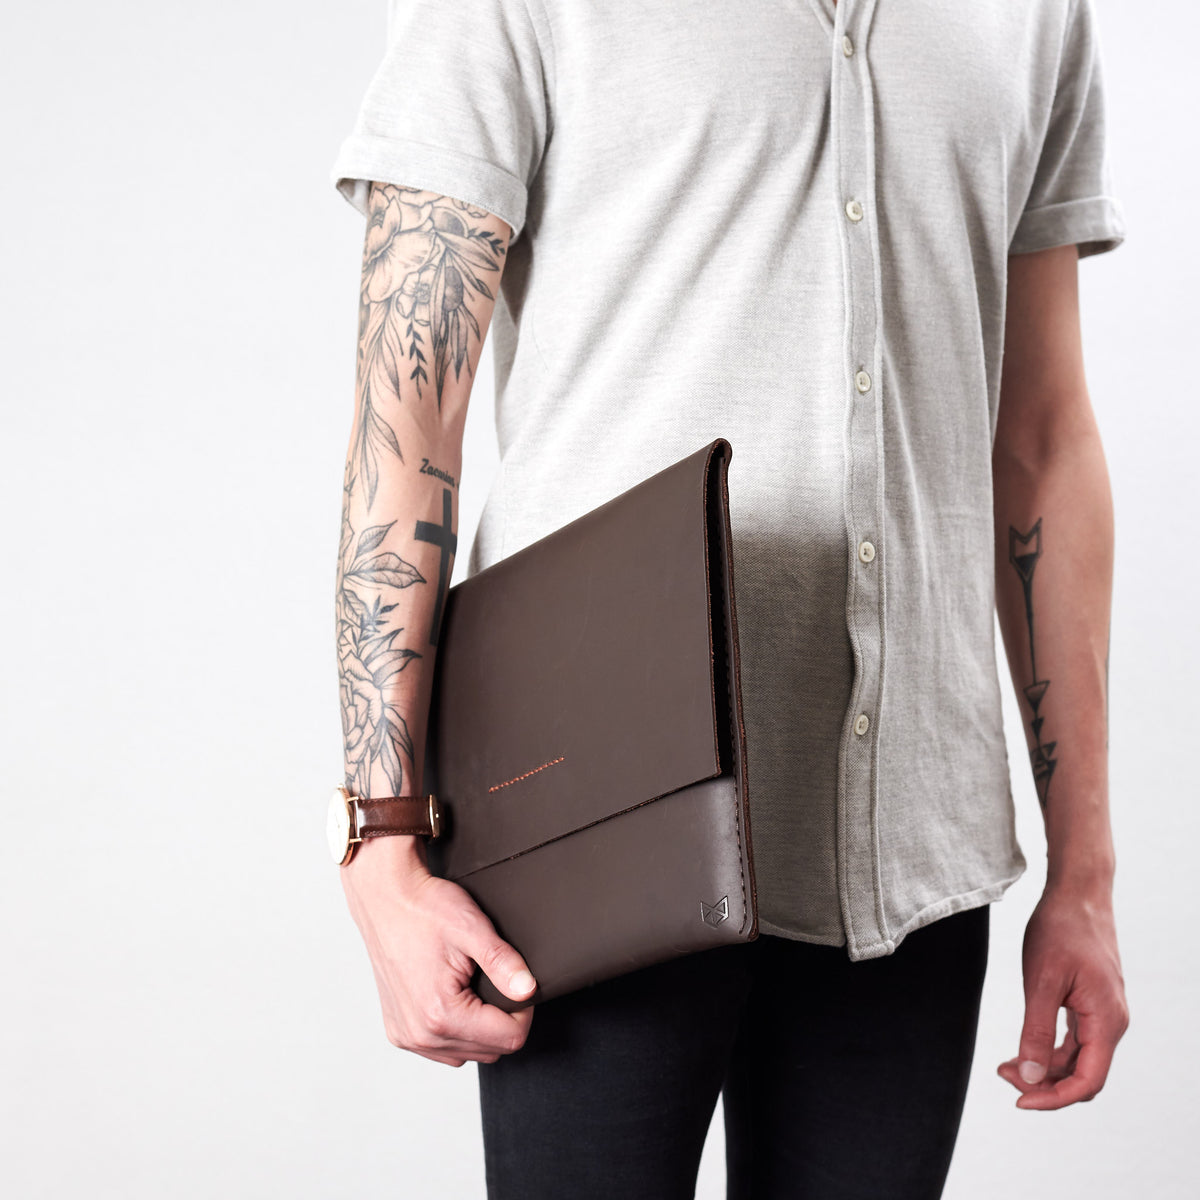 Style front view. Marron draftsman 1 case by Capra Leather. Google pixel book sleeve.